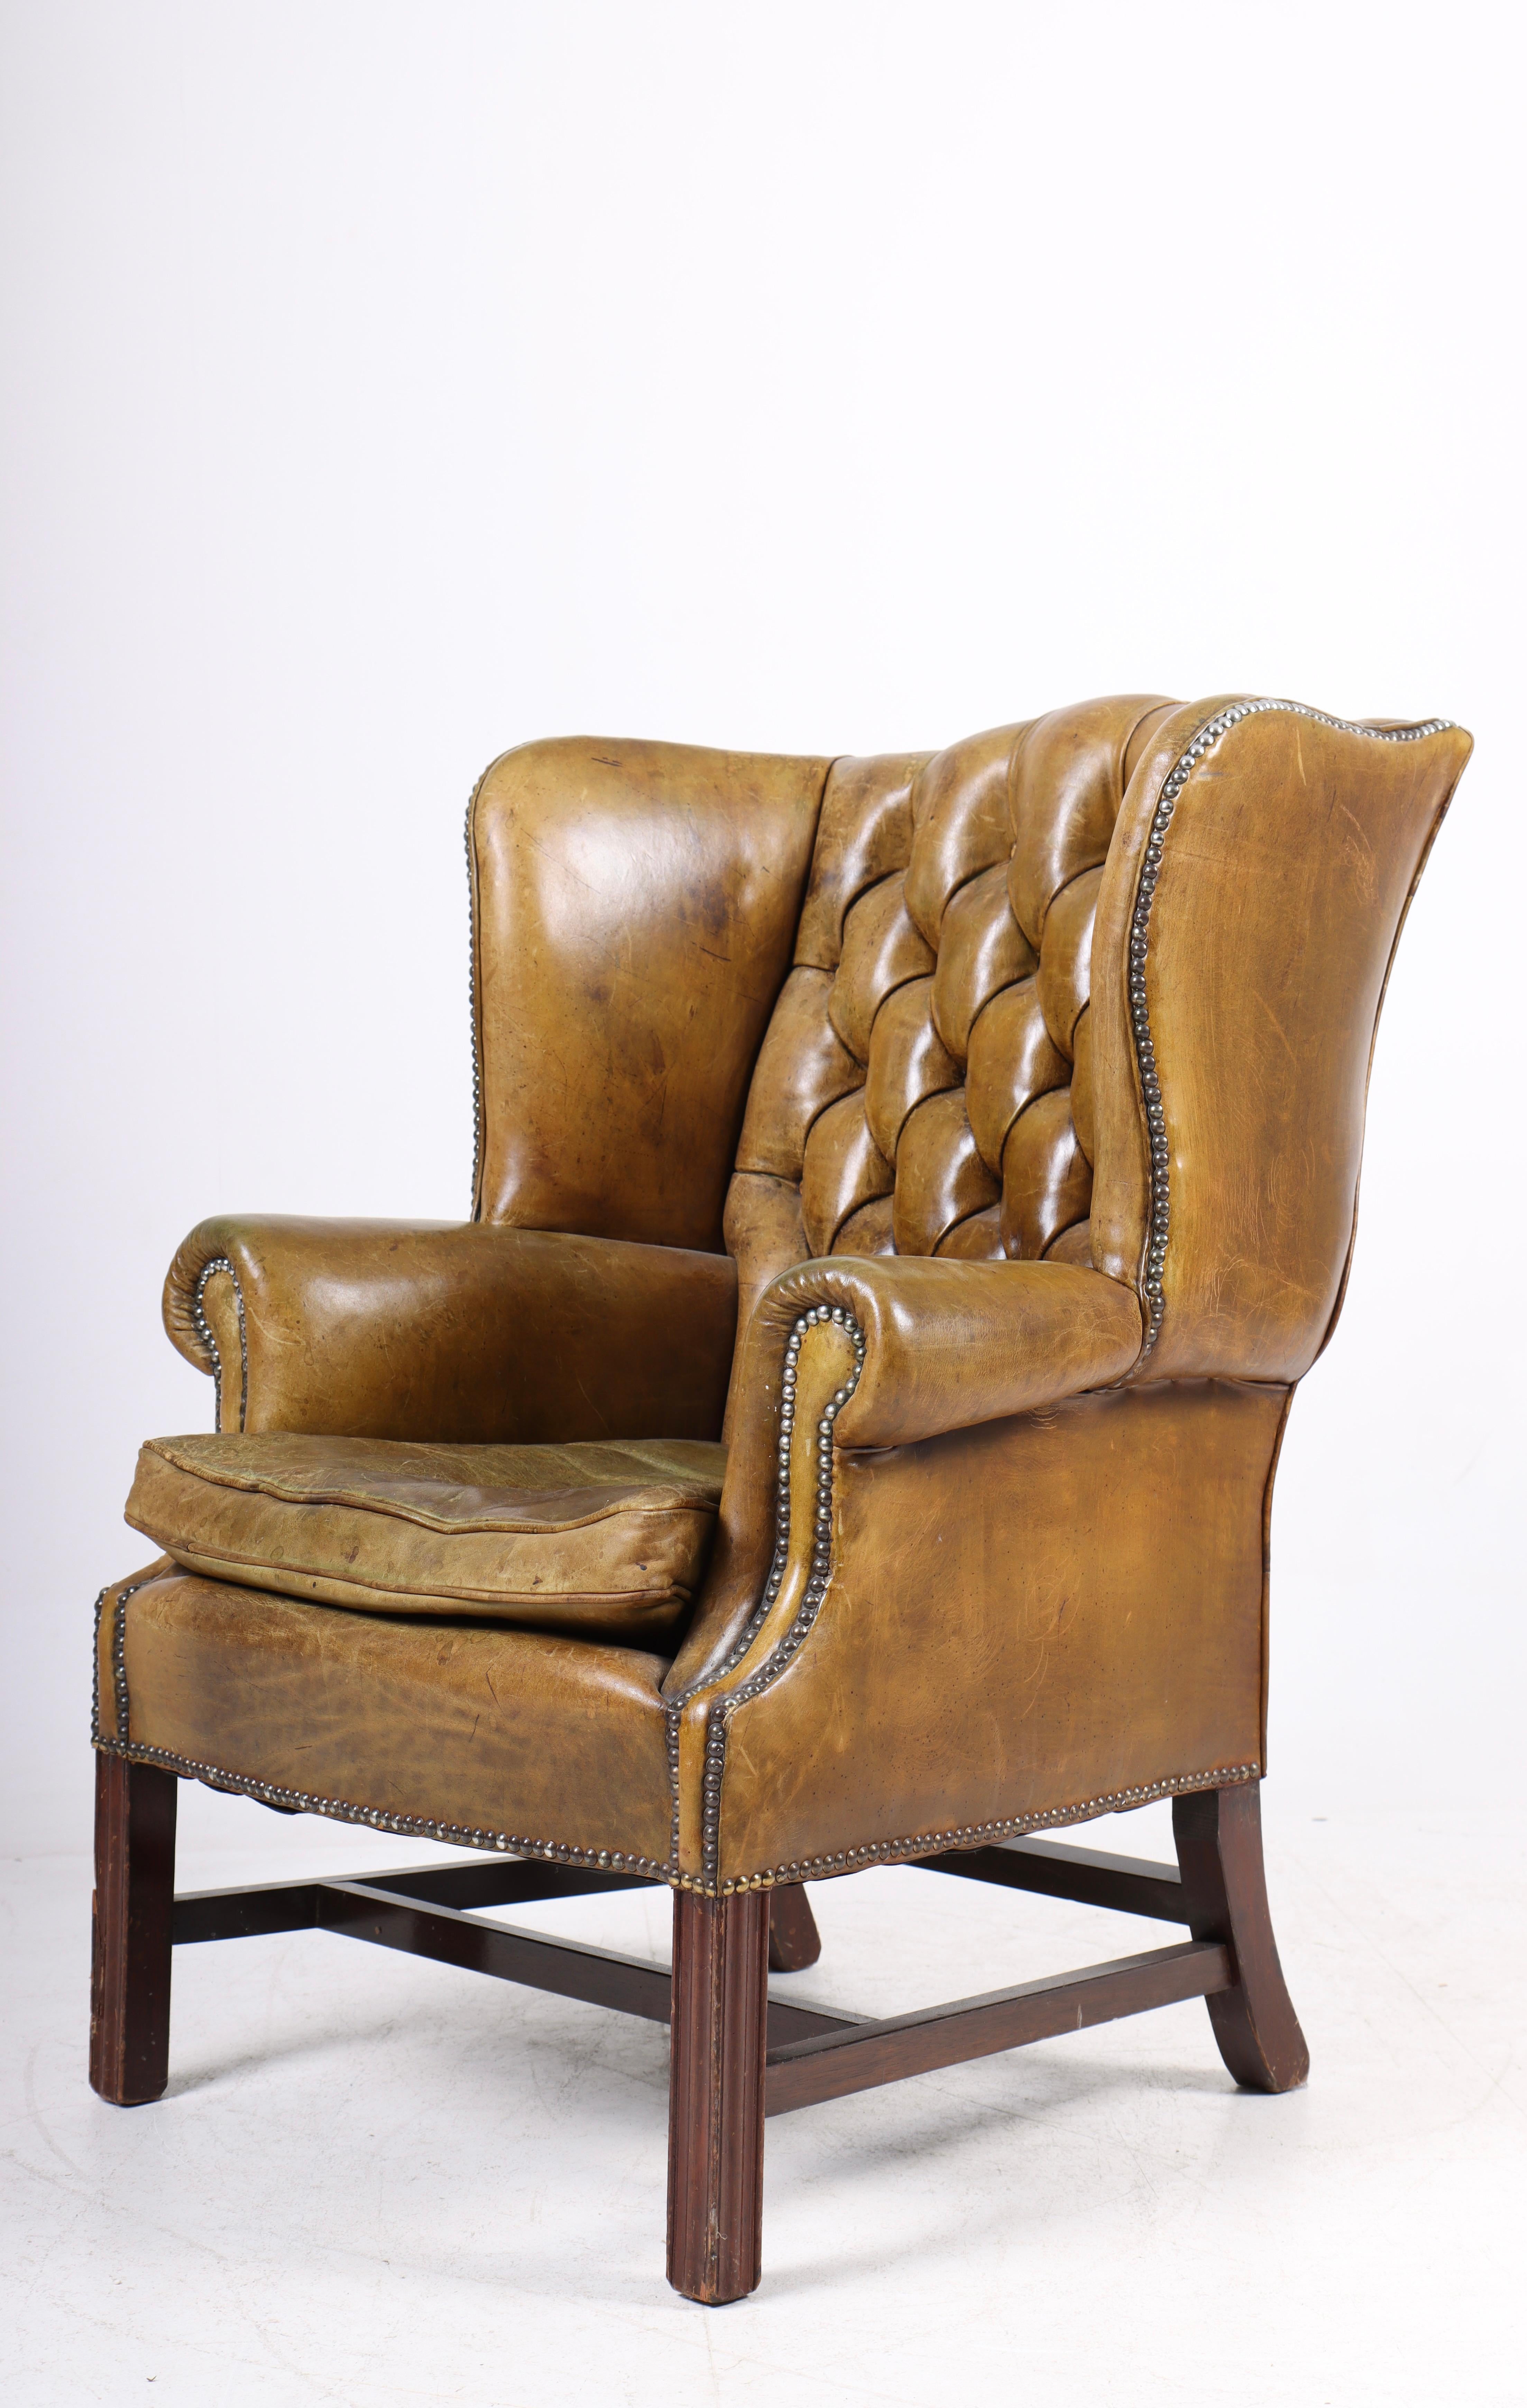 Chesterfield Wingback Chair in Leather, Made in Denmark 1950s In Good Condition For Sale In Lejre, DK